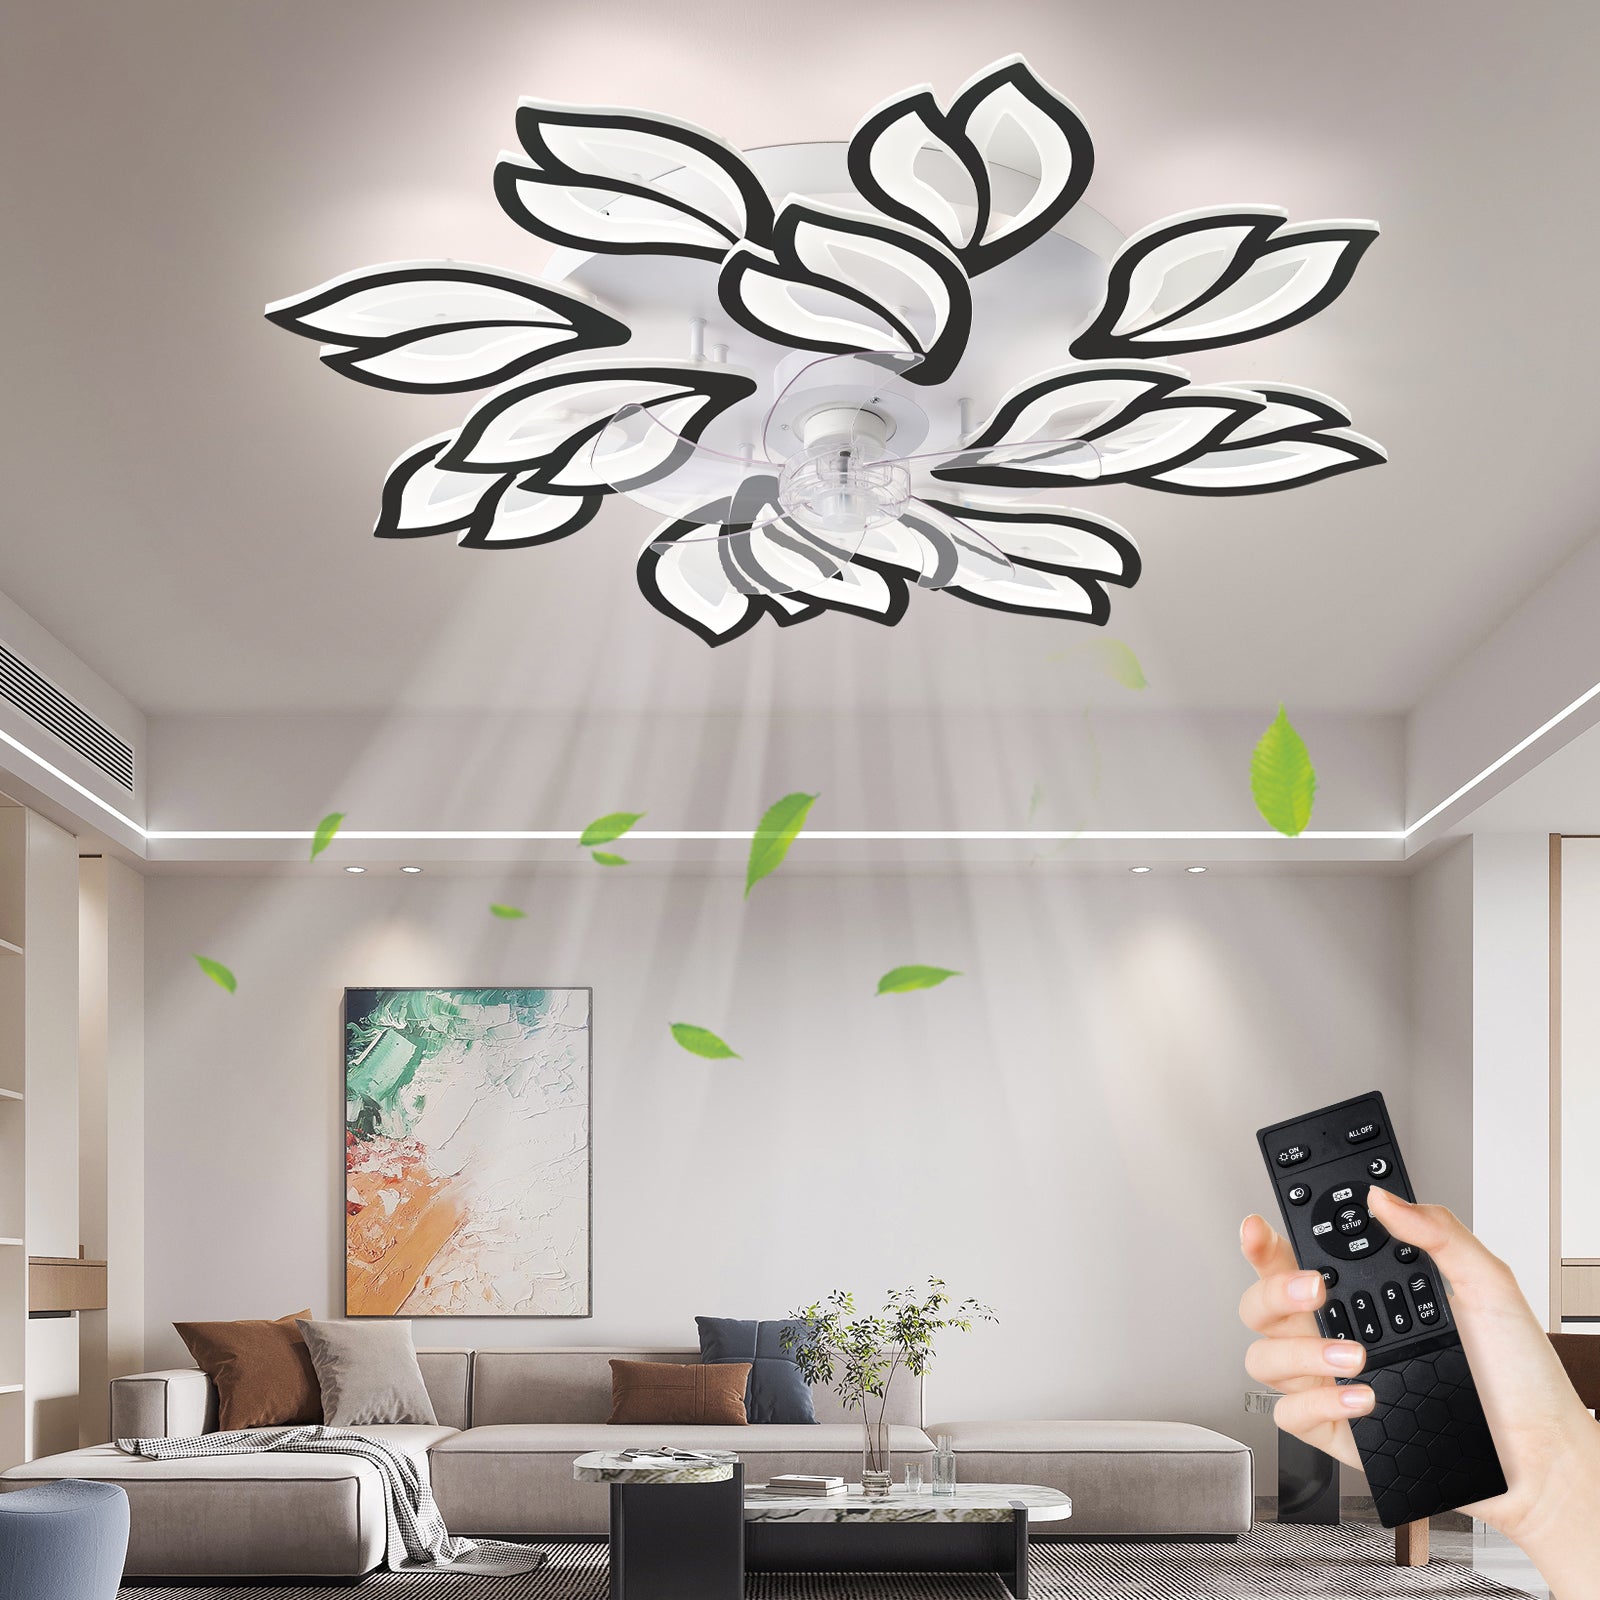 REYDELUZ 35" Modern Ceiling Fan with Lights and Remote & APP Control, Dimmable 6 Speed Reversible Blades, LED Flush Mount Low Profile Fan Light,Bladeless Ceiling Fan with Smart Timing